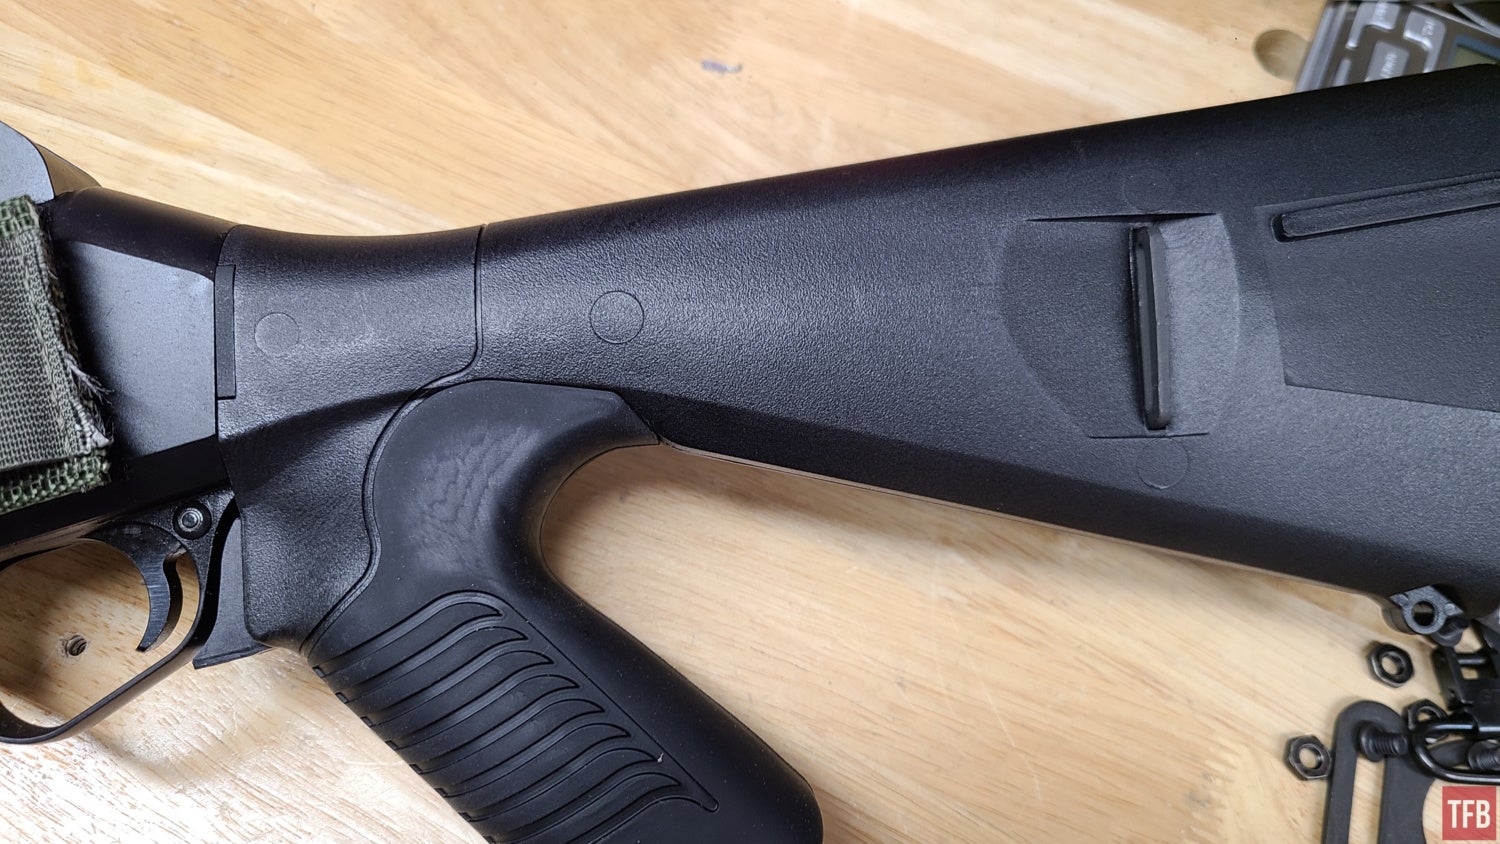 Upgrading A Turkinelli With Mesa Tactical Gear (Part 1)